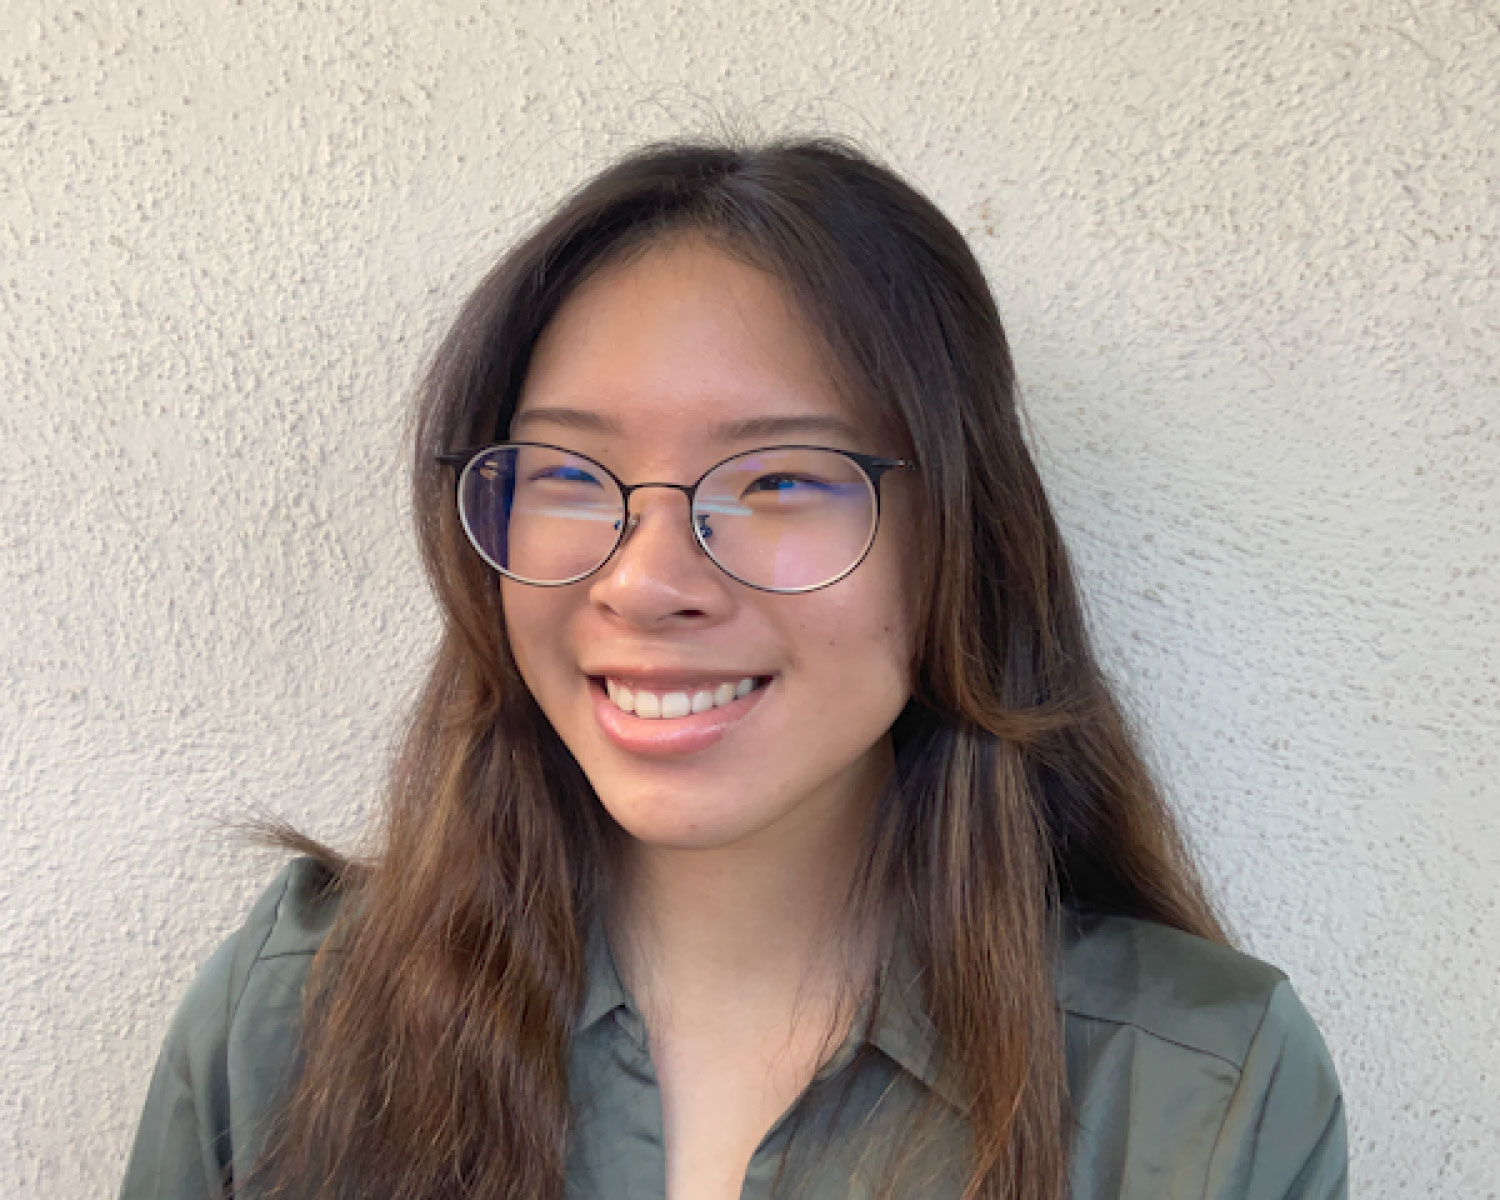 Pasadena City College Student Wins National STEM Competition